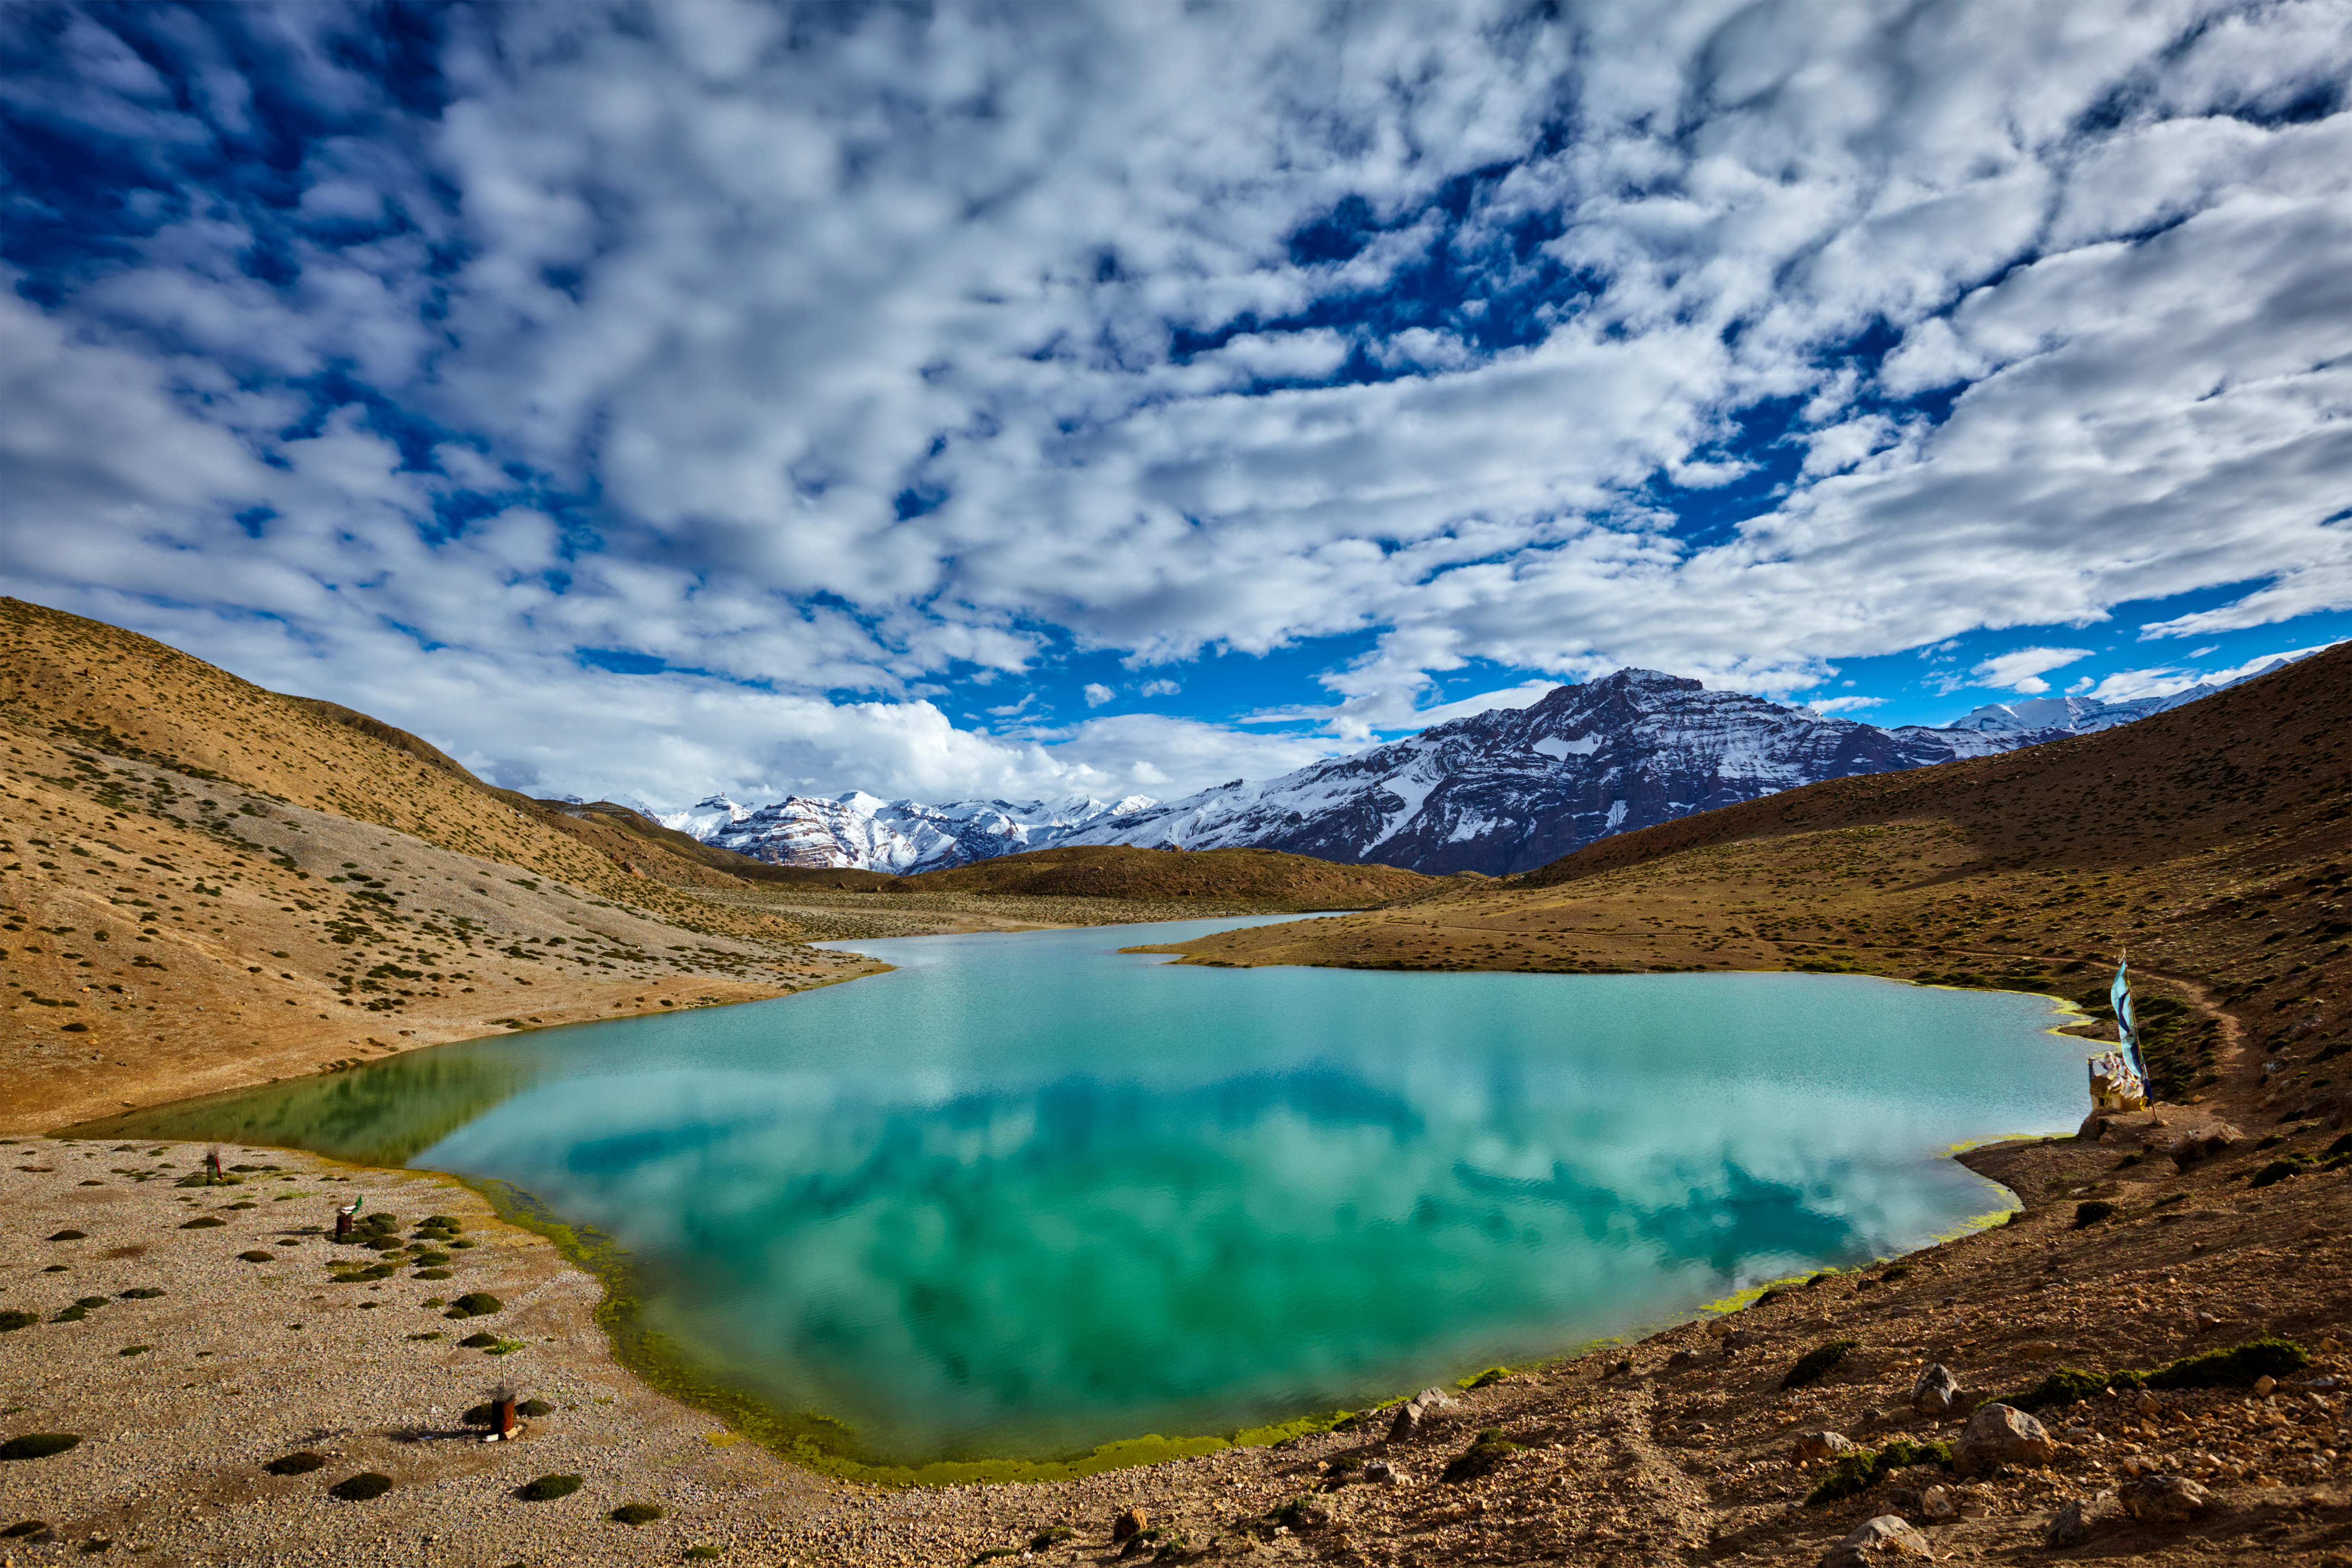 Spiti Valley tour packages